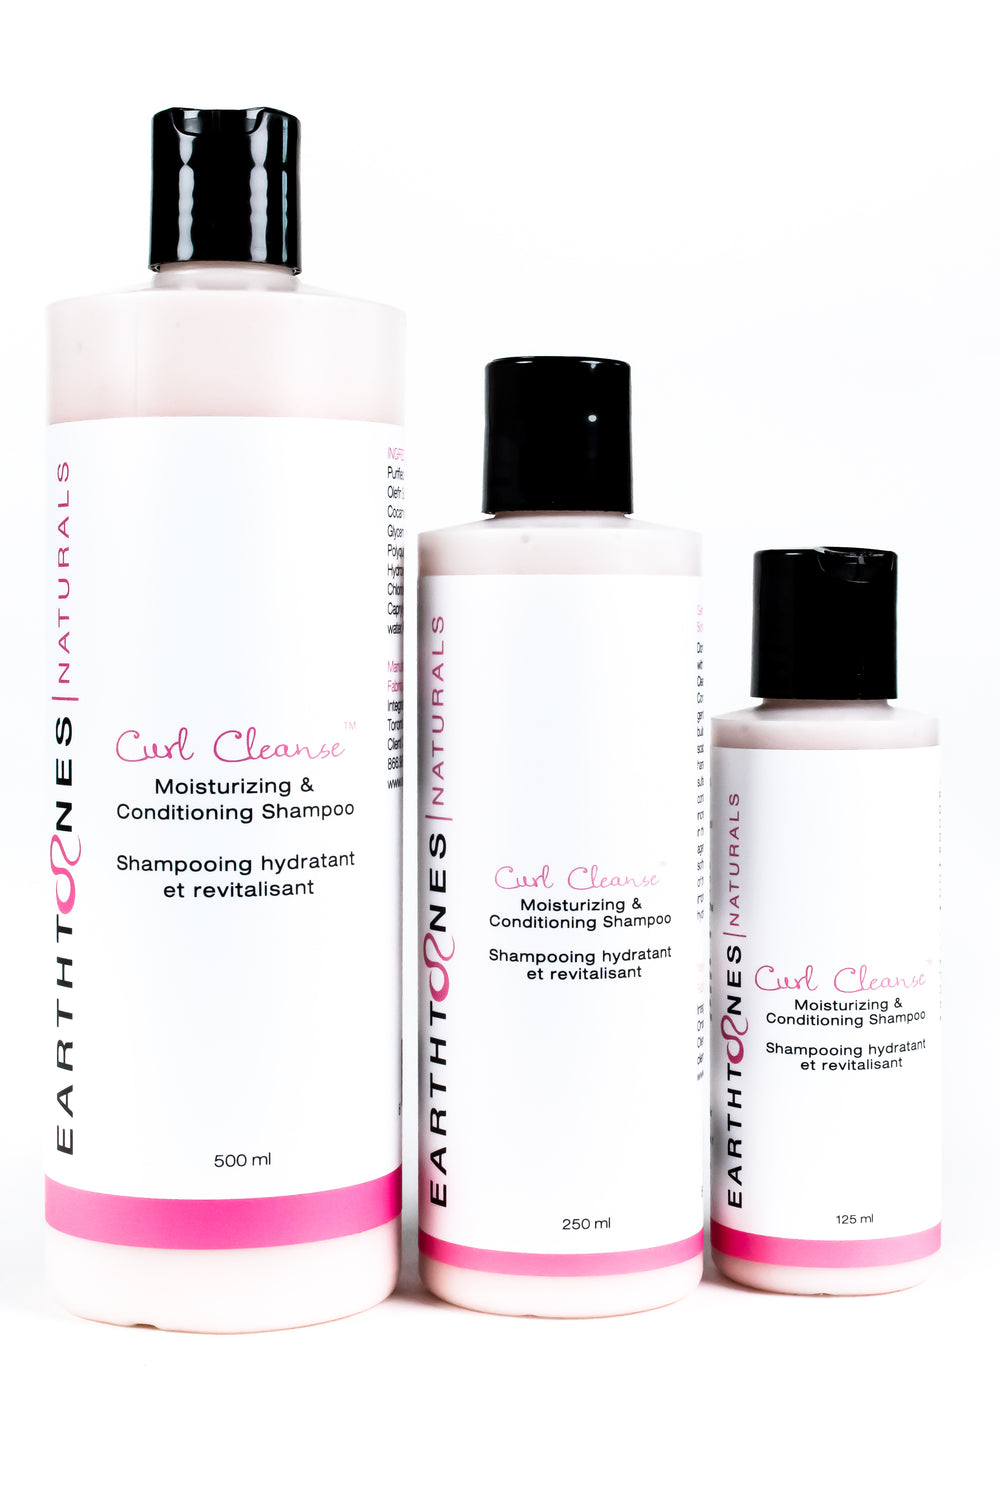 Curl Cleanse™ Moisturizing & Conditioning Shampoo